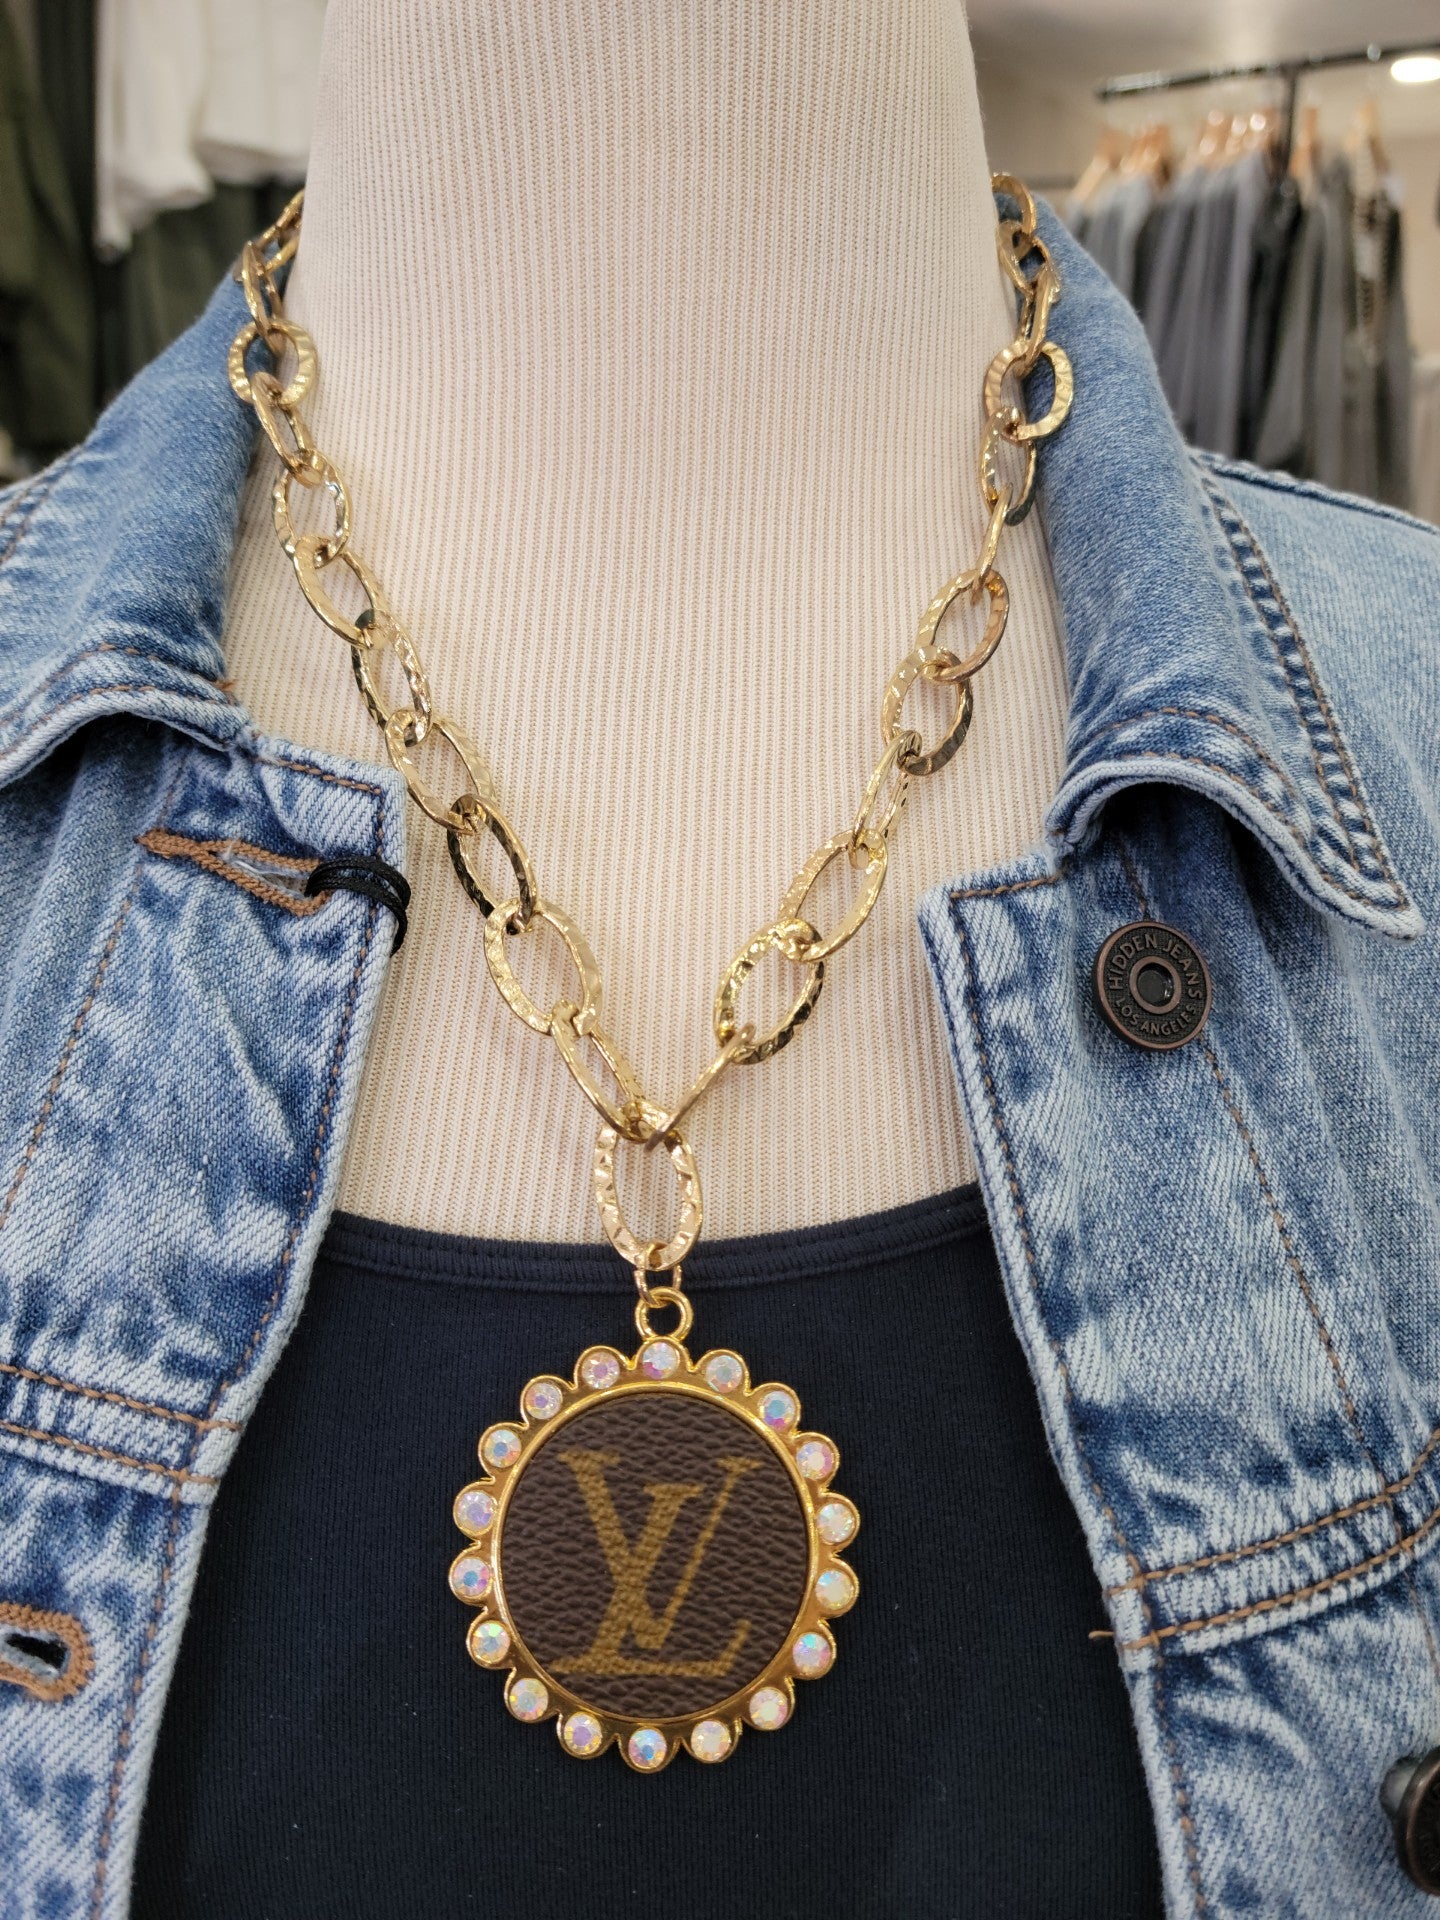 "Charming" Upcycled LV Large "LV" Bling Round Dangle Charm Necklace with Oval Hoops Chain